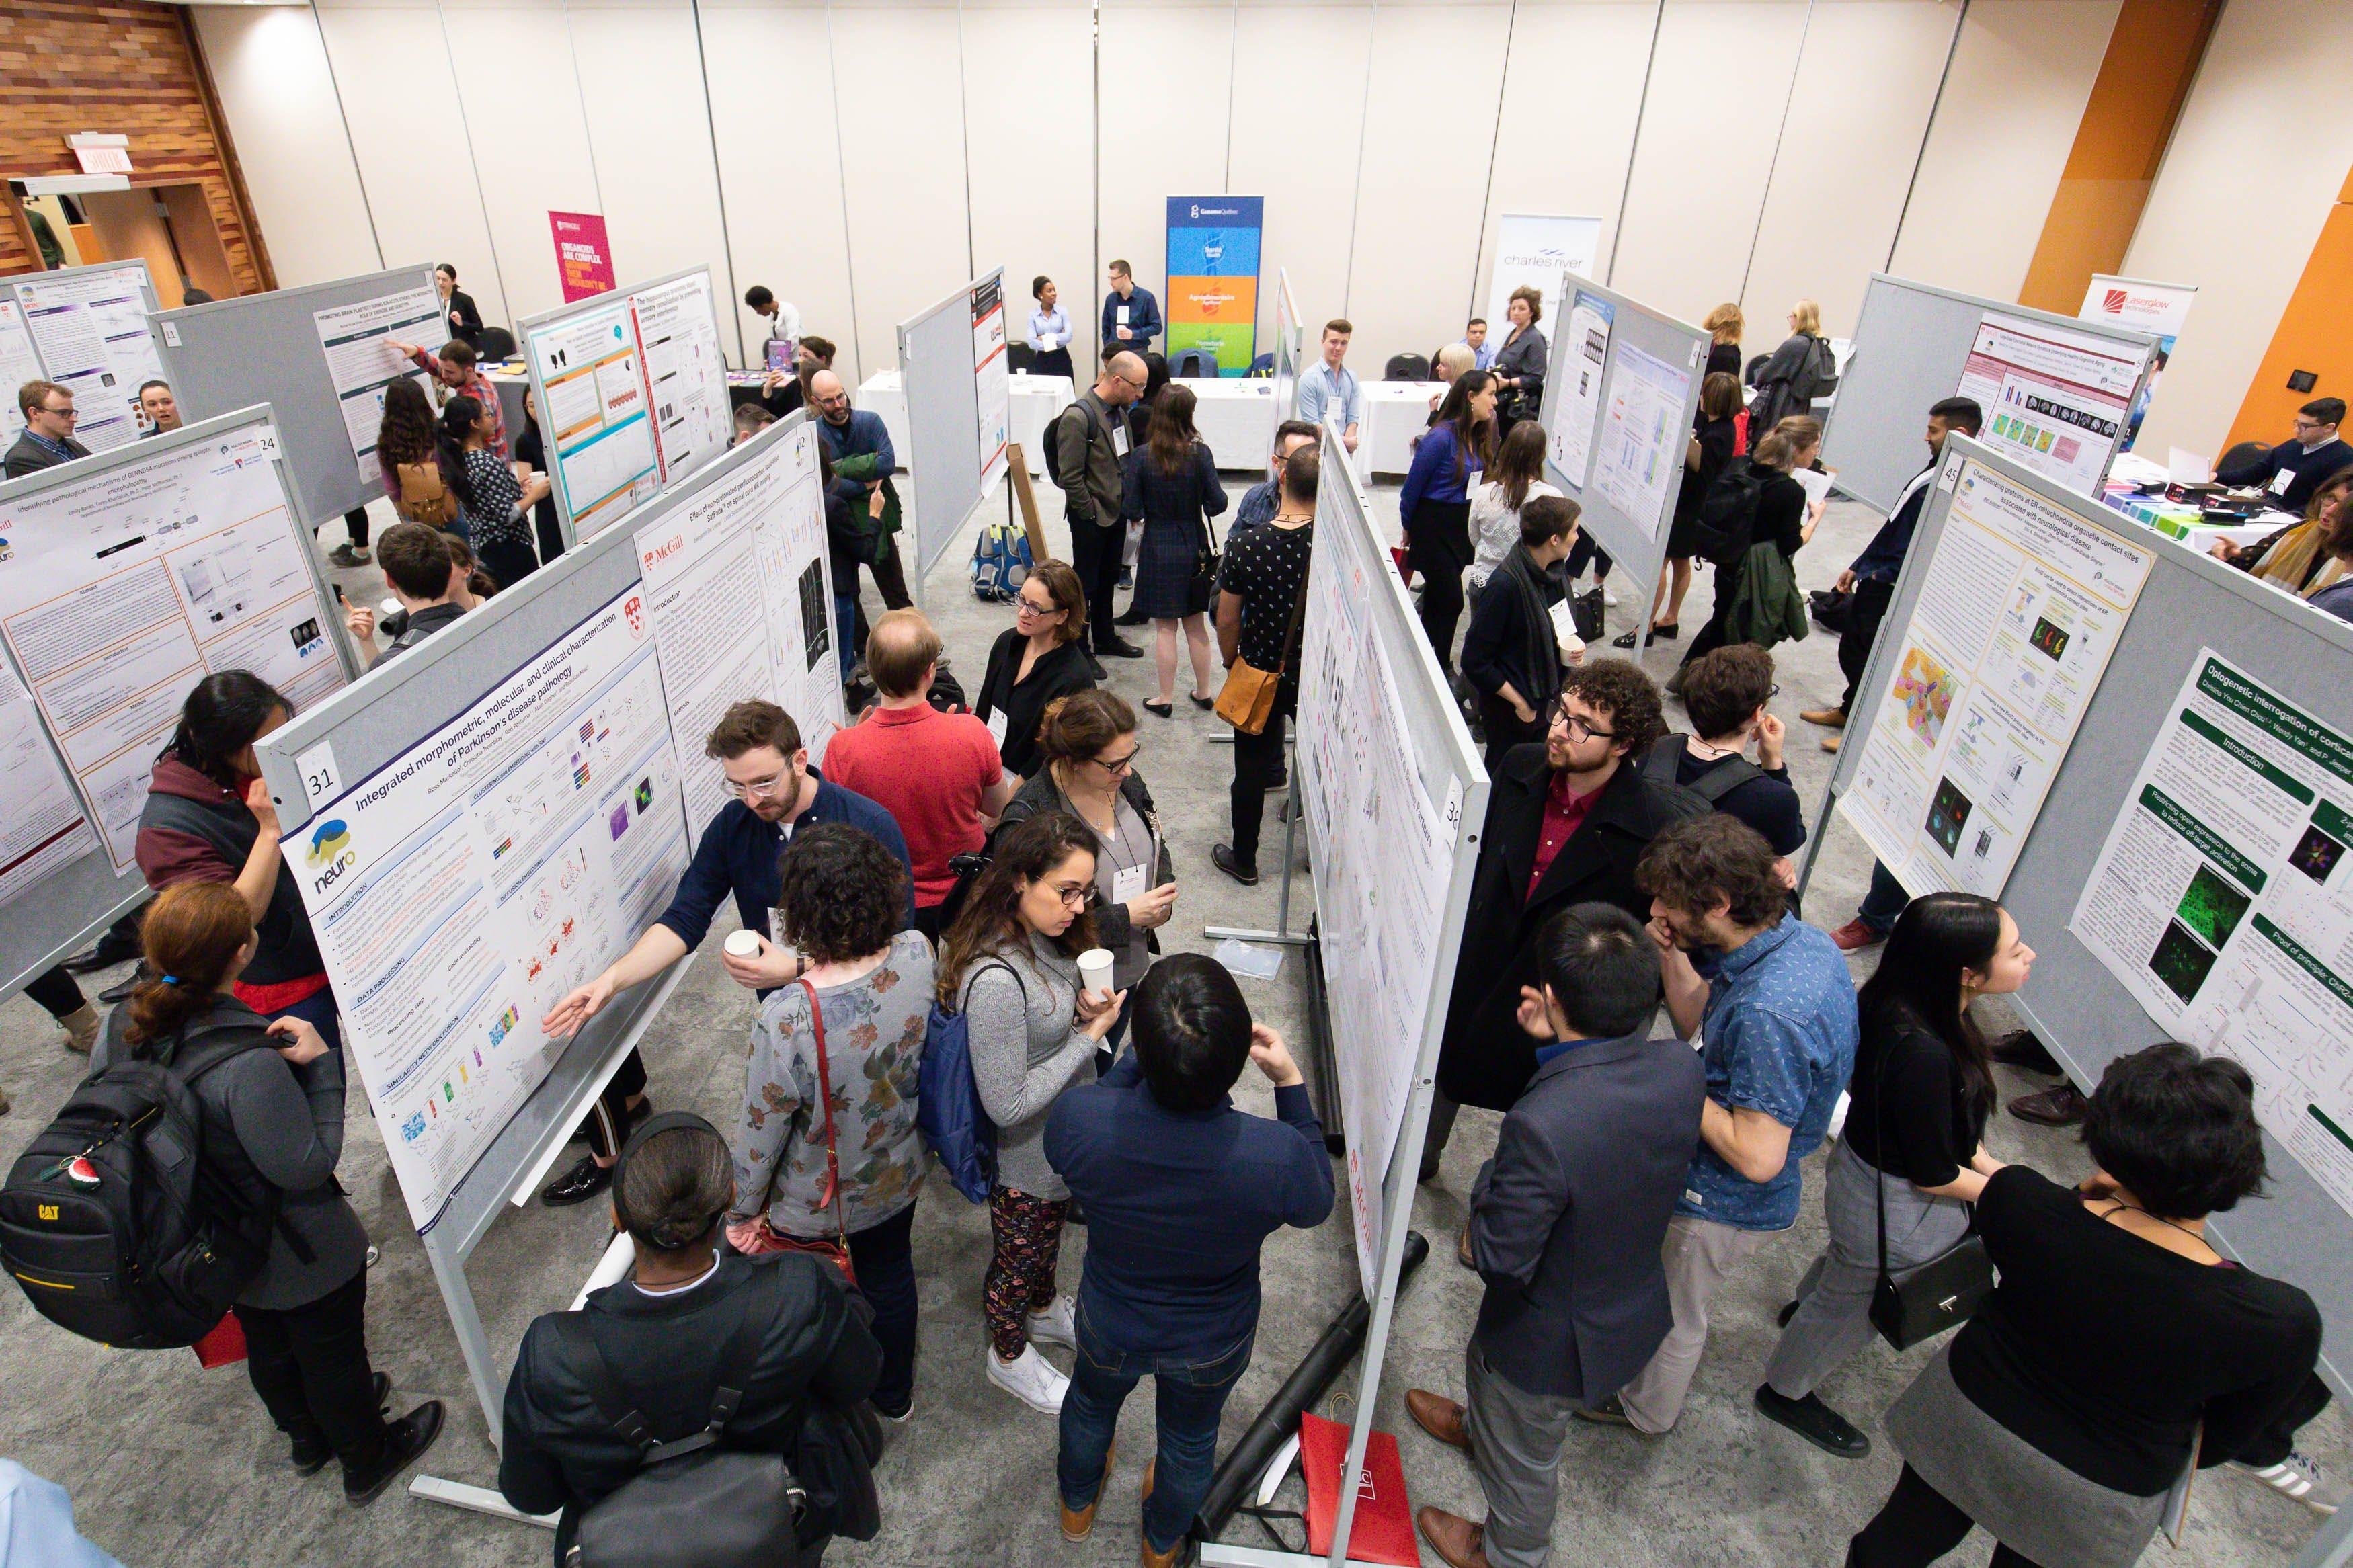 Event attendees at a poster session in a large hall, overhead view